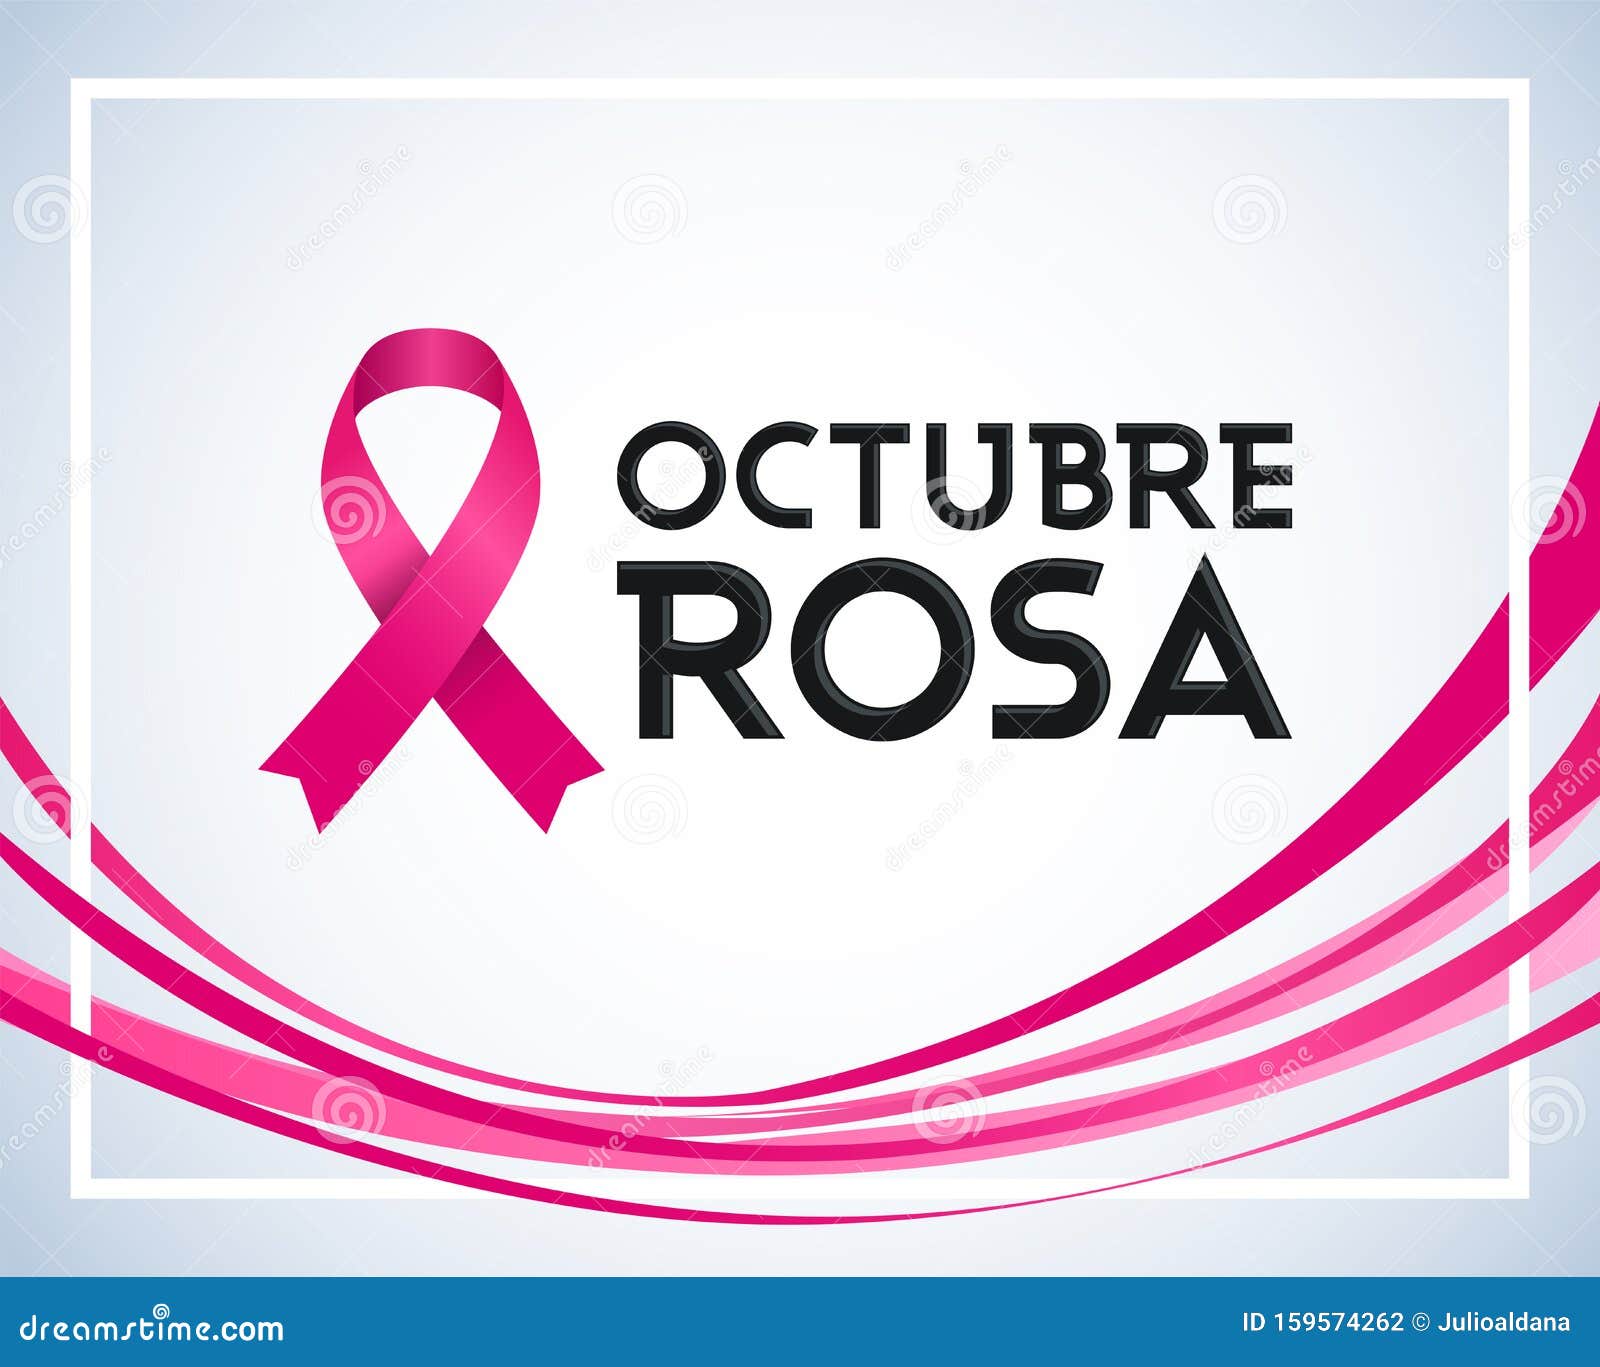 octubre rosa, pink october spanish text, breast cancer awareness month .